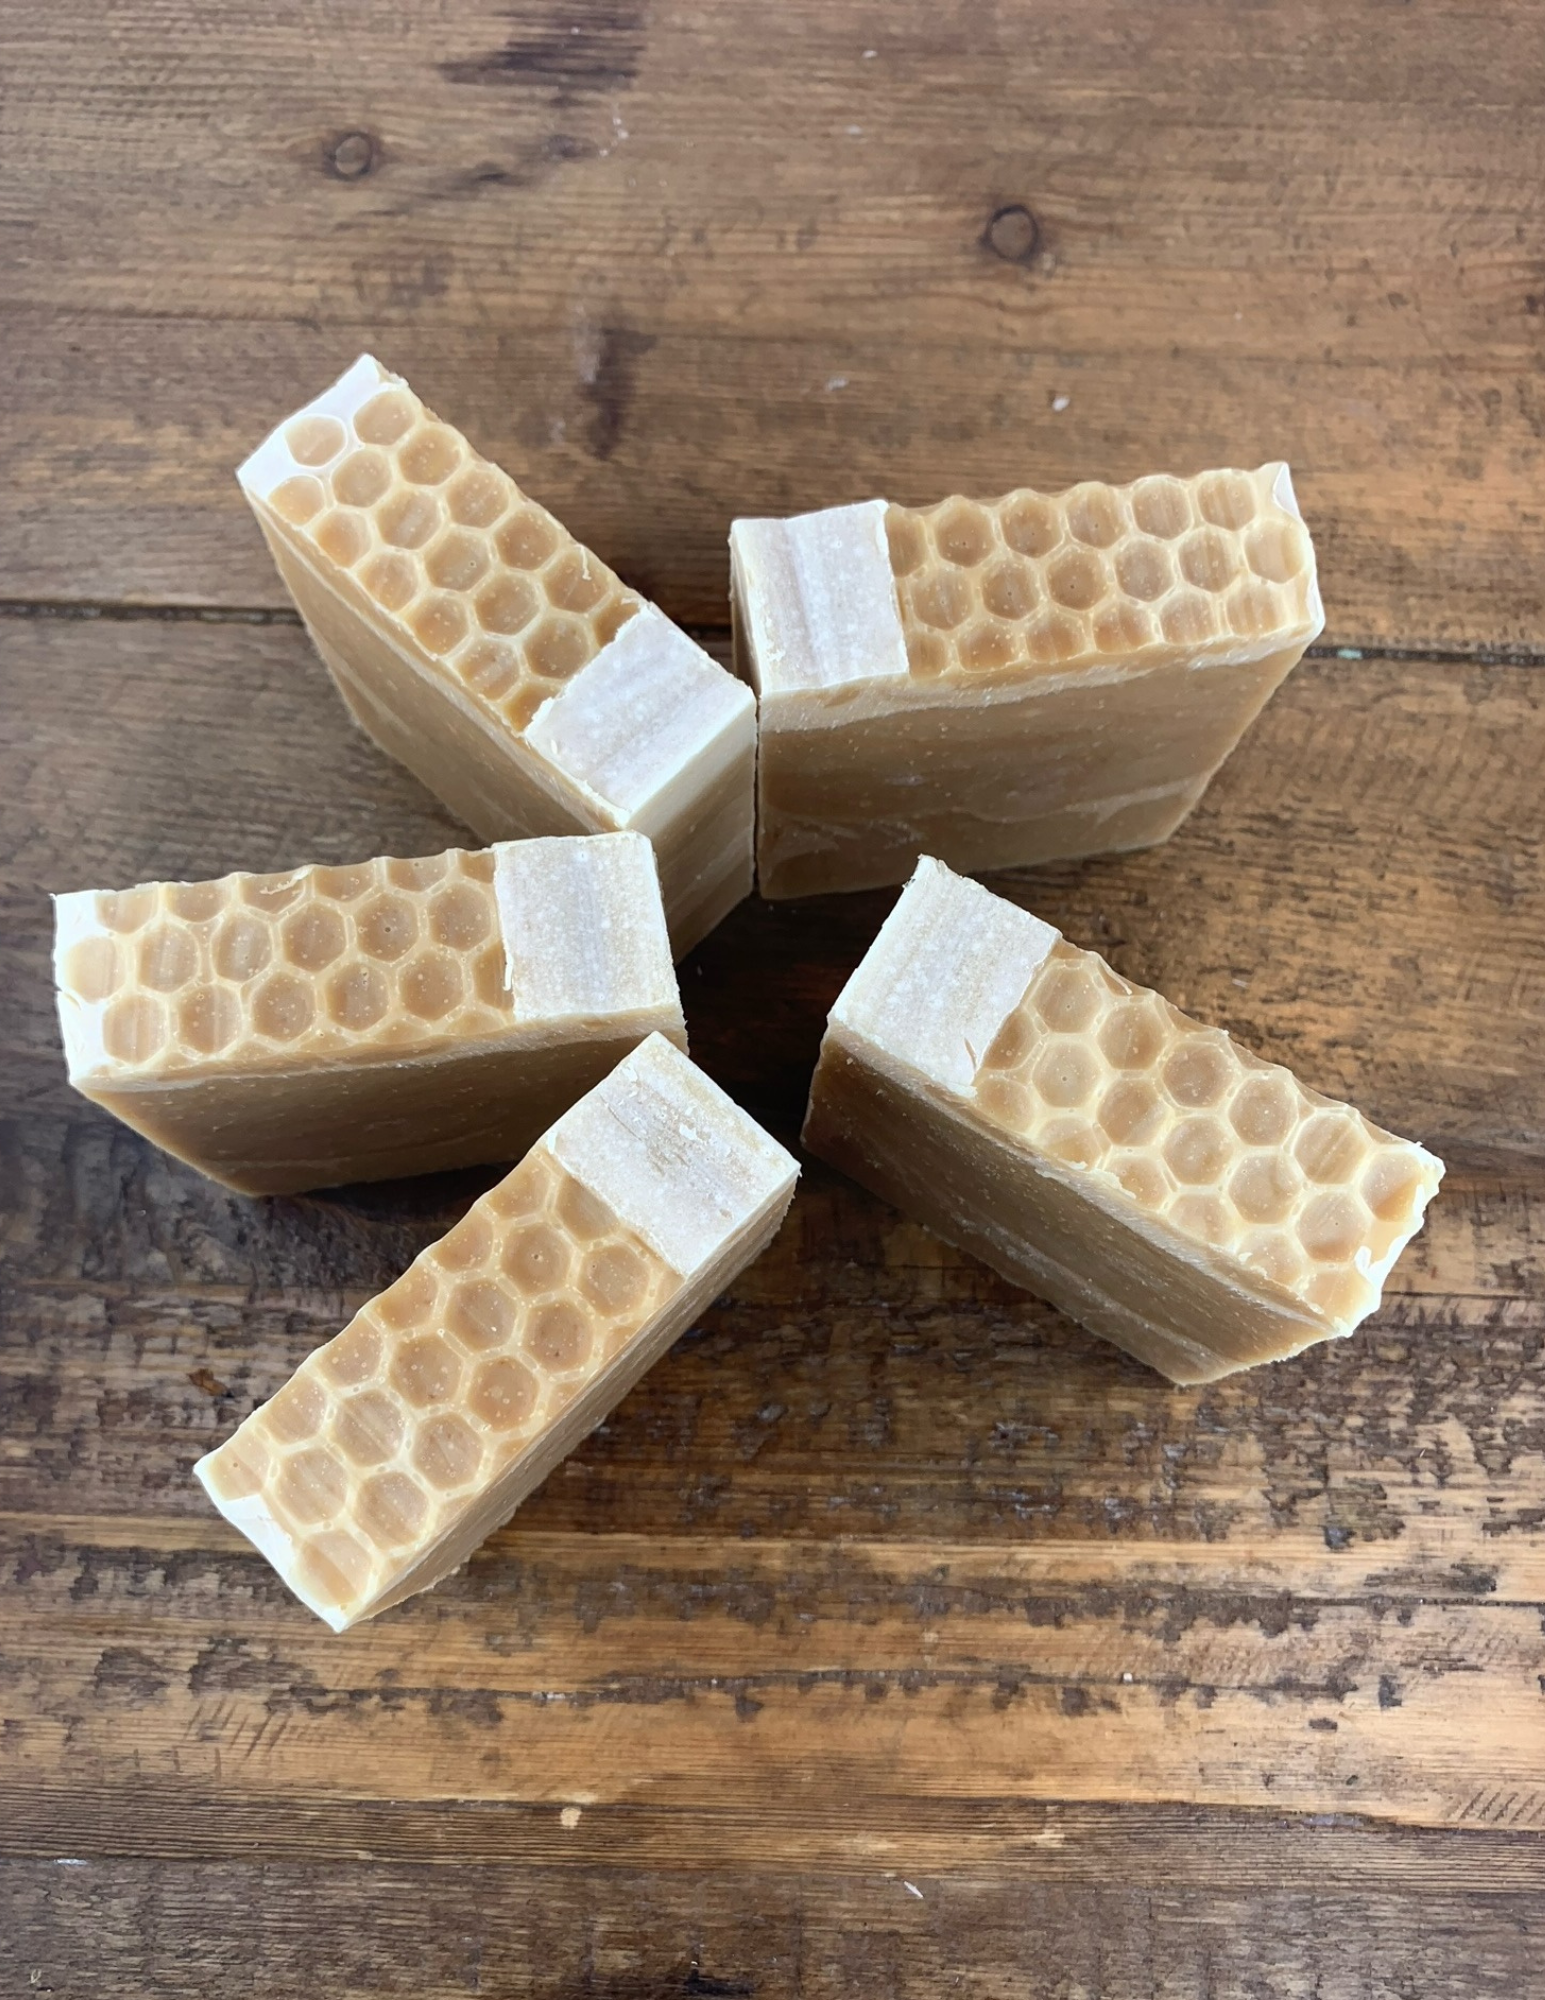 Five bars of Triple Butter Honey Soap sit on a wooden table. Detailing shows the honeycomb tops of the soaps.